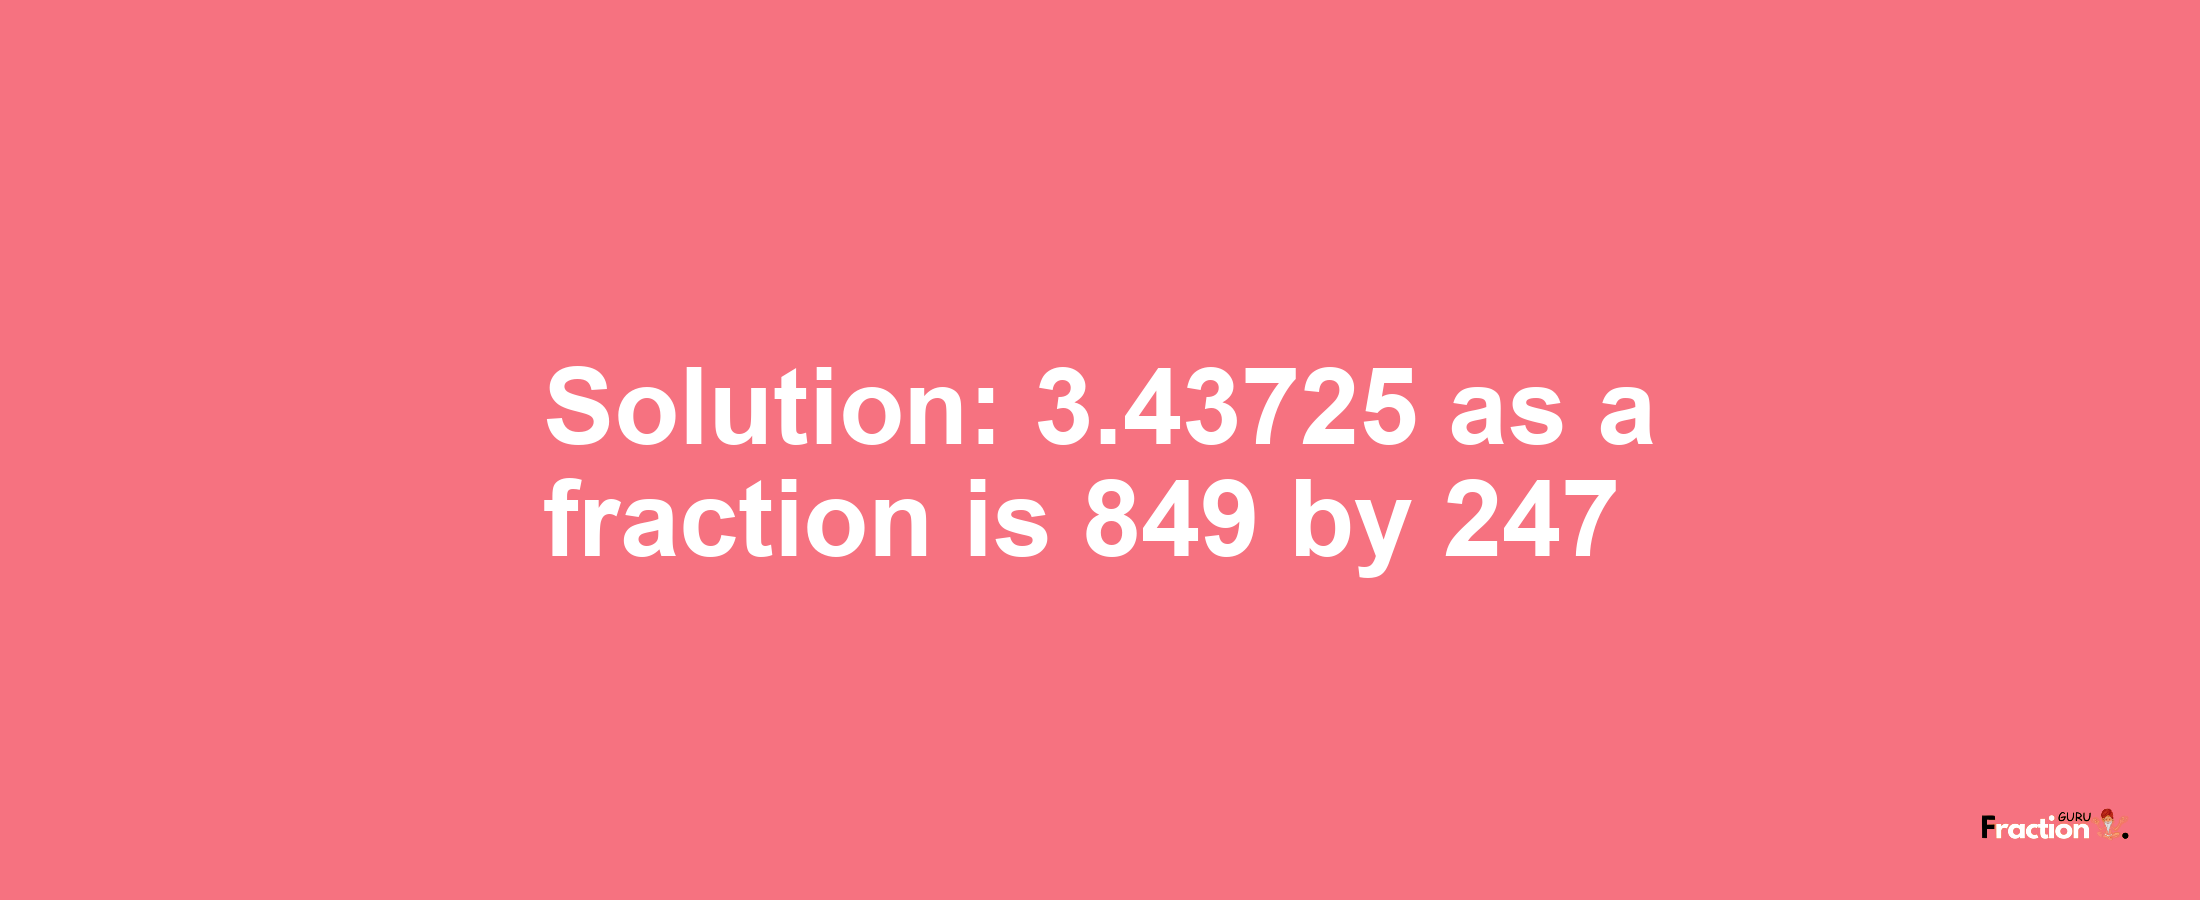 Solution:3.43725 as a fraction is 849/247